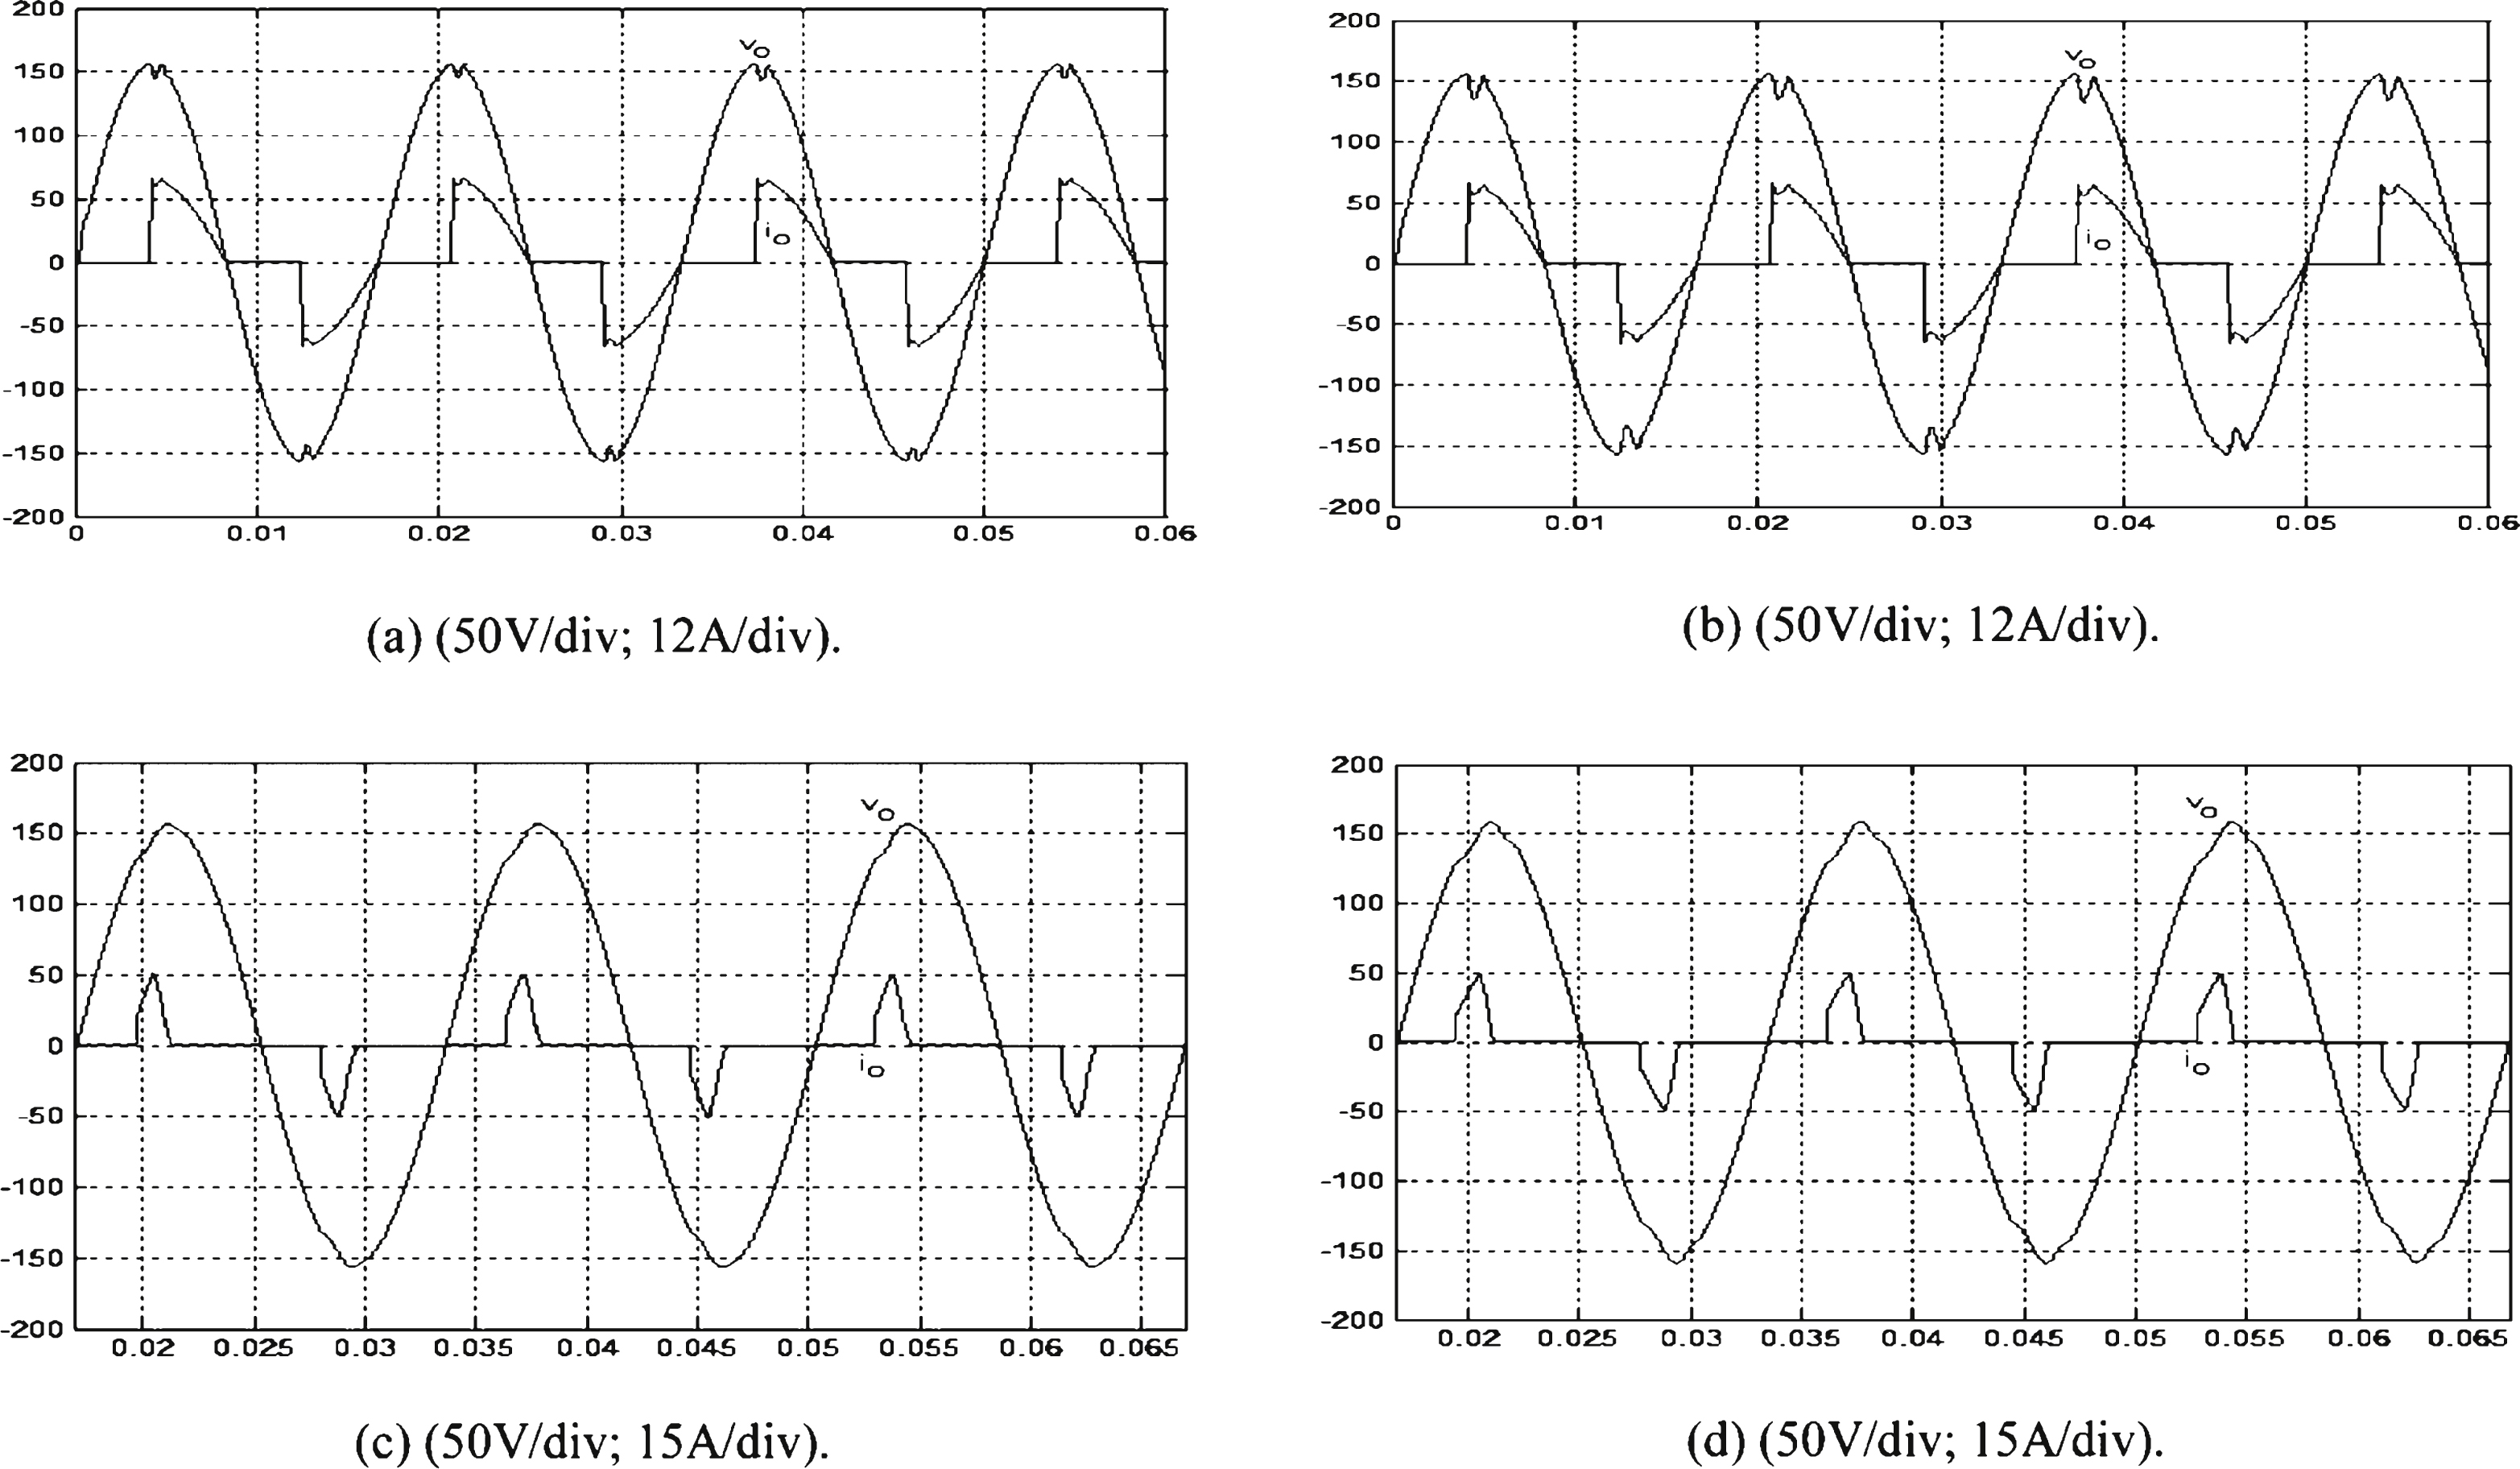 Simulated waveforms of output voltage and the load current under (a) TRIAC load with the proposed control; (b) TRIAC load with classic SMC; (c) rectifier load with the proposed control; (d) rectifier load with classic SMC.